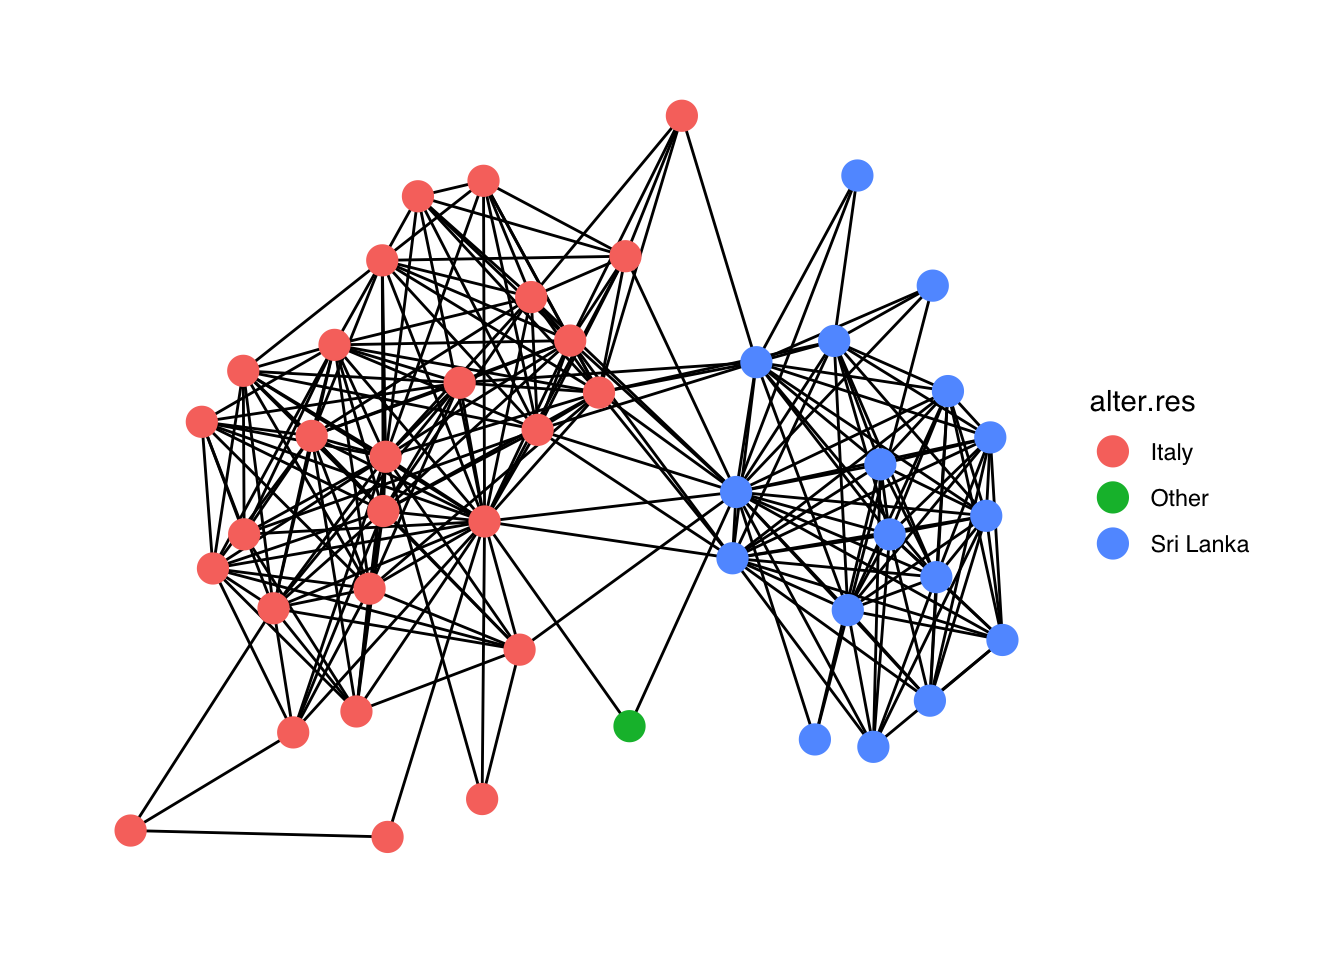 Chapter 3 Representing and visualizing ego-networks